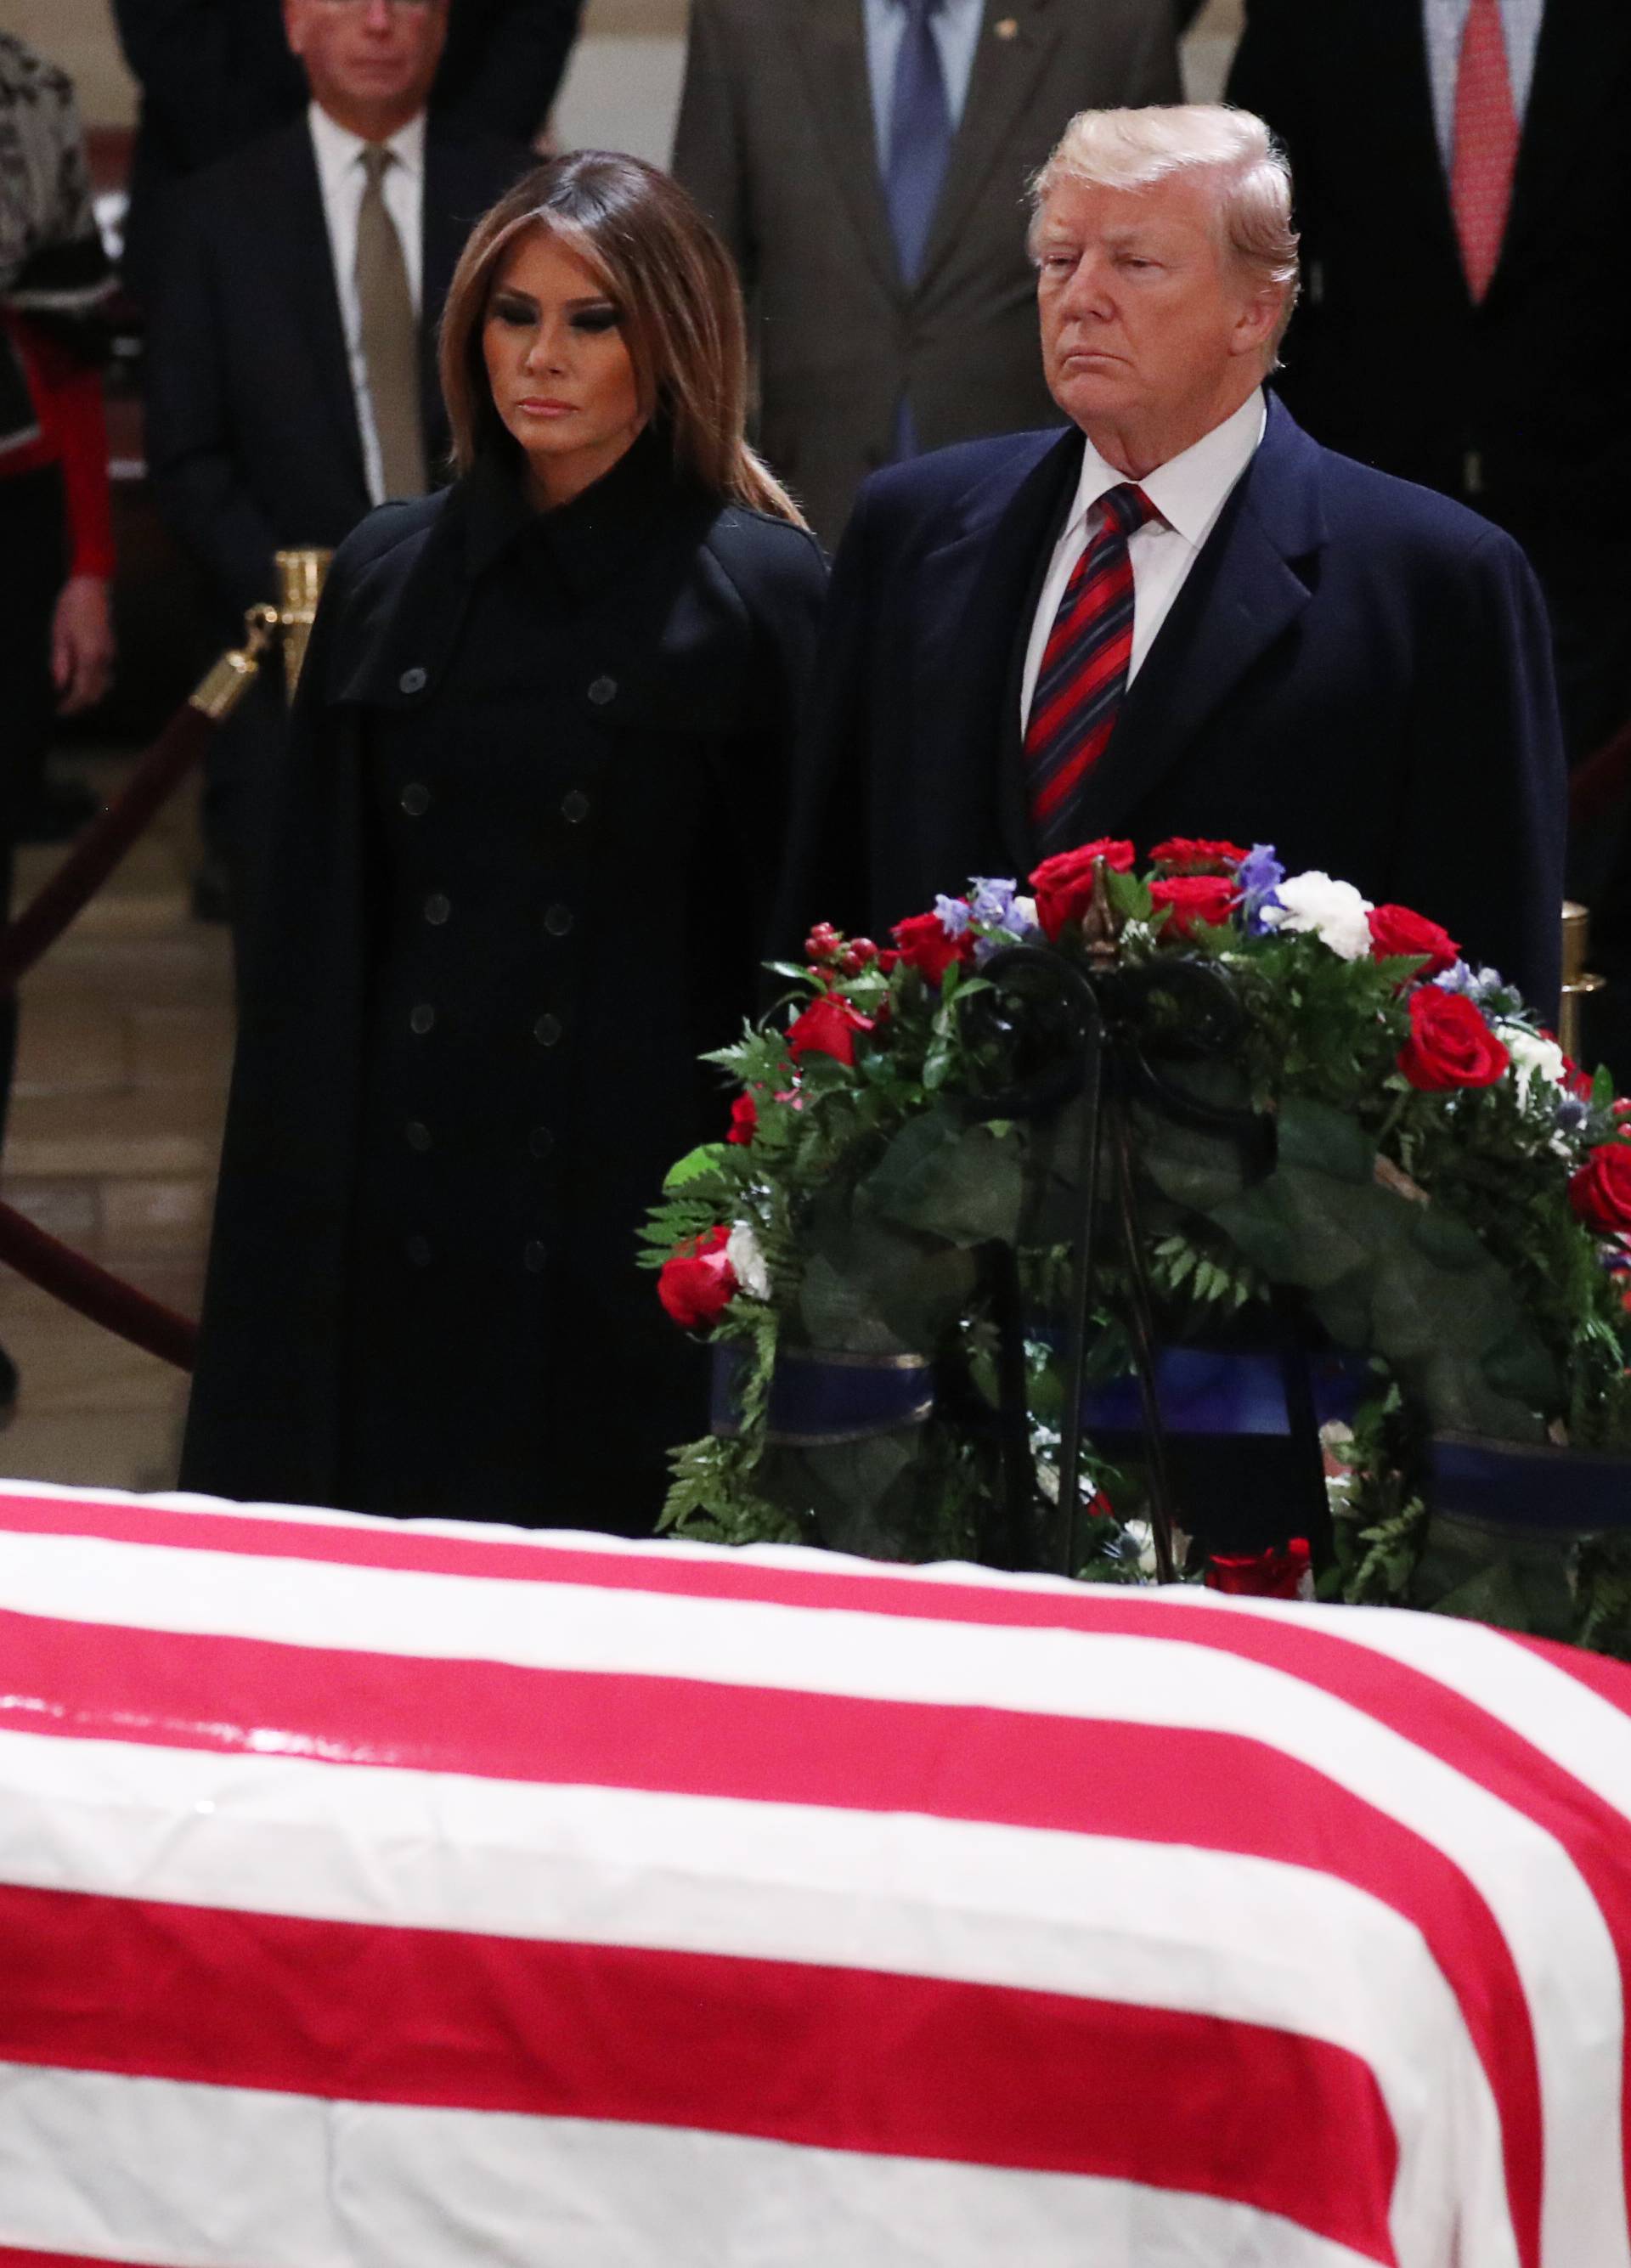 President Donald Trump and First Lady Melania Trump pay their respects at the casket of former U.S. President George H.W. Bush in Capitol Rotunda in Washington